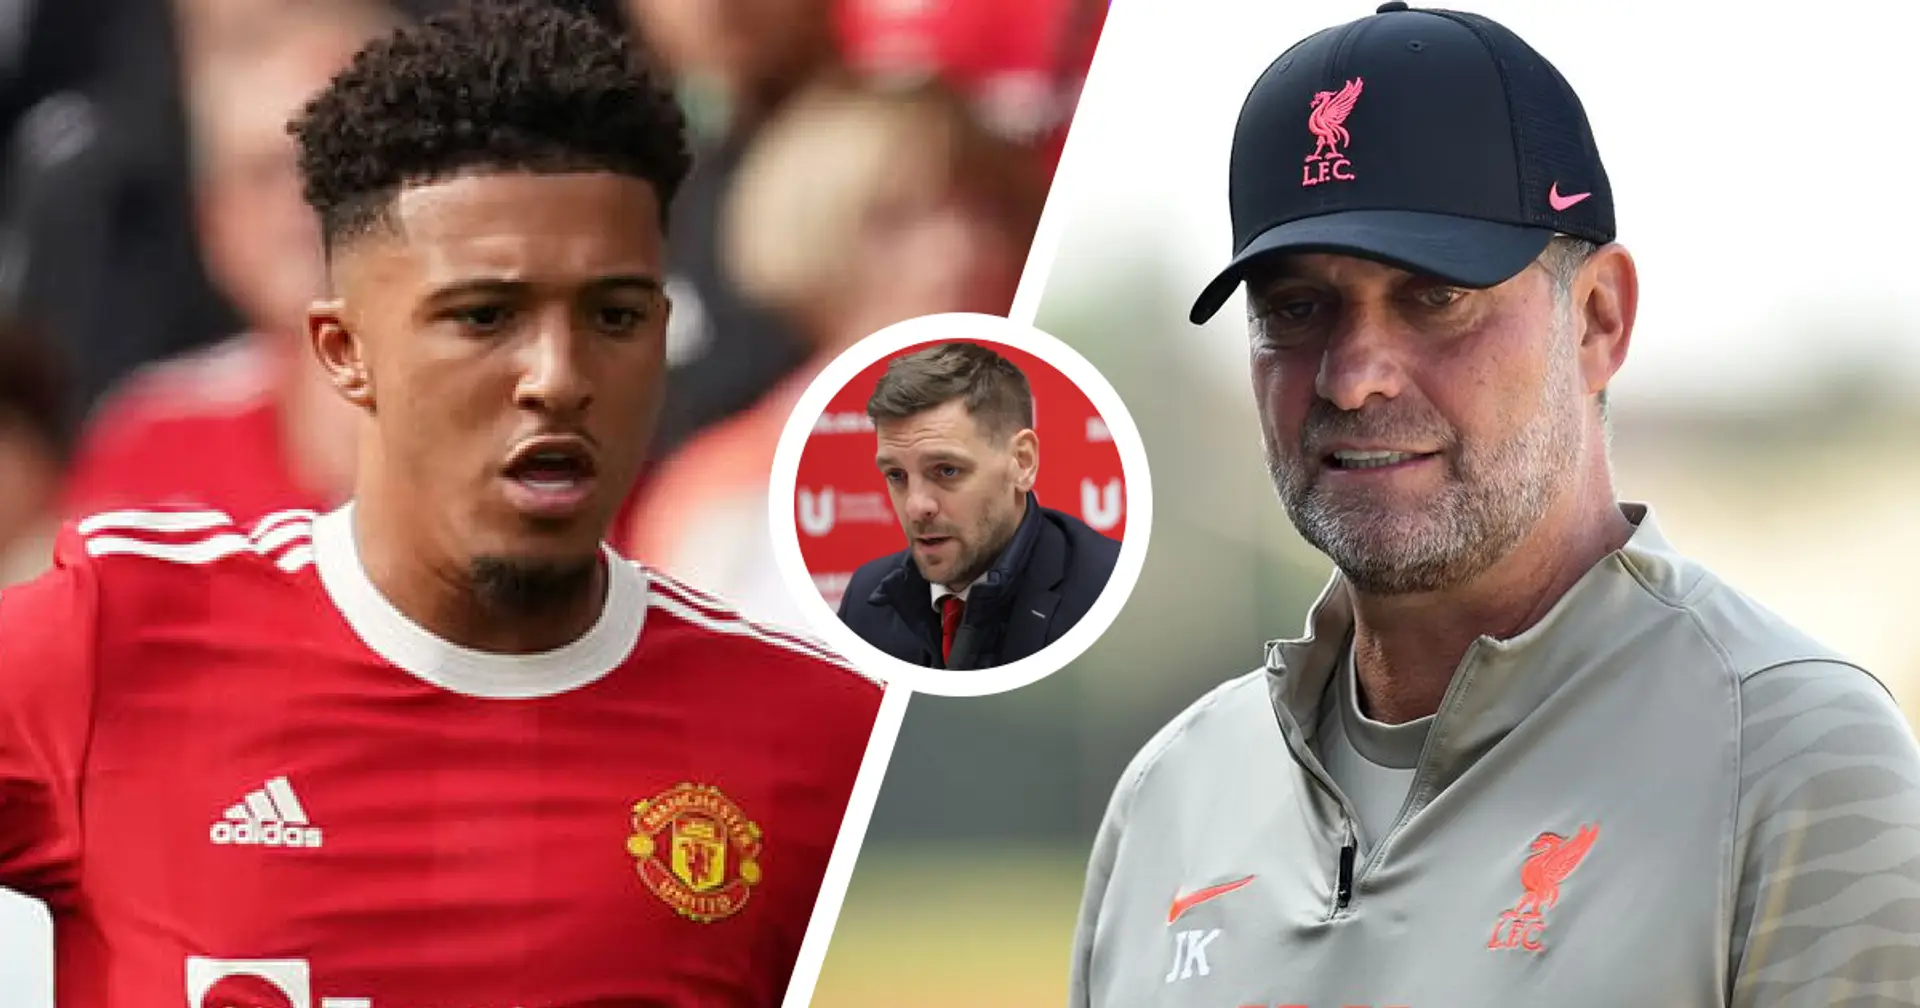 'Put him in the Liverpool team': Ex-PL player Jonathan Woodgate makes astute Sancho observation